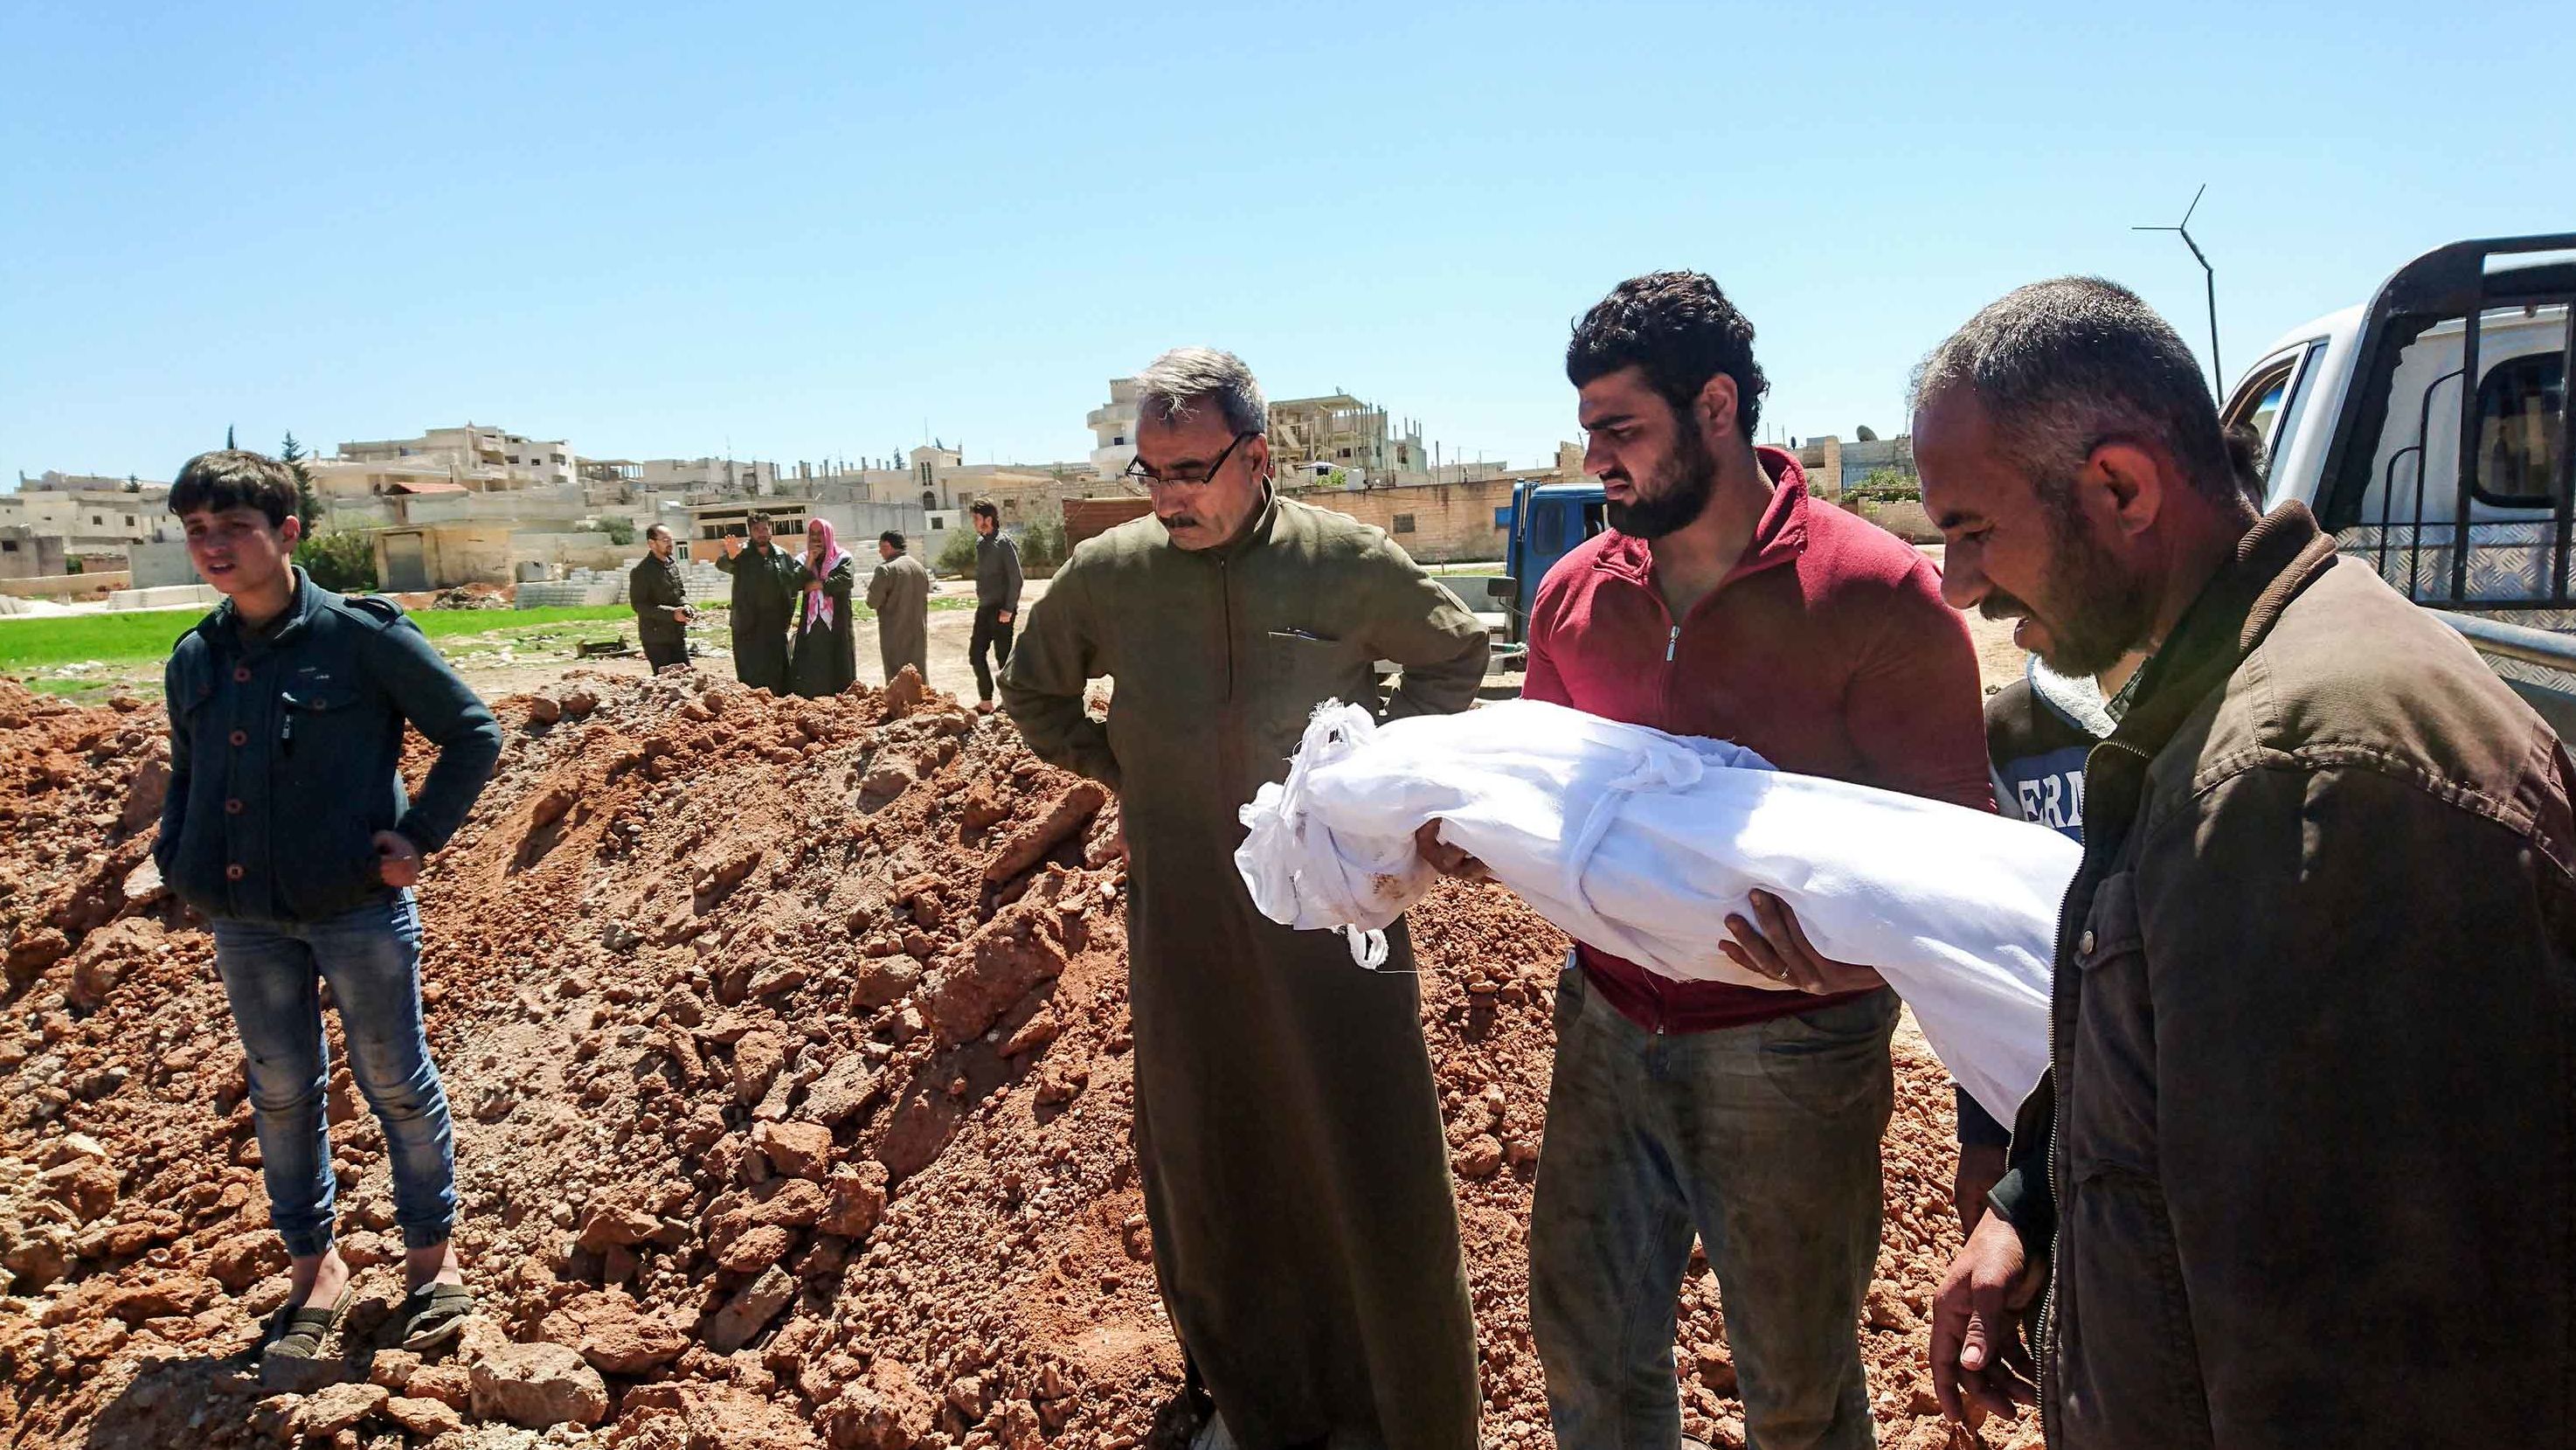 Syrians bury the bodies of victims of the attack in Khan Sheikhoun, in Idlib province, on April 5, 2017.